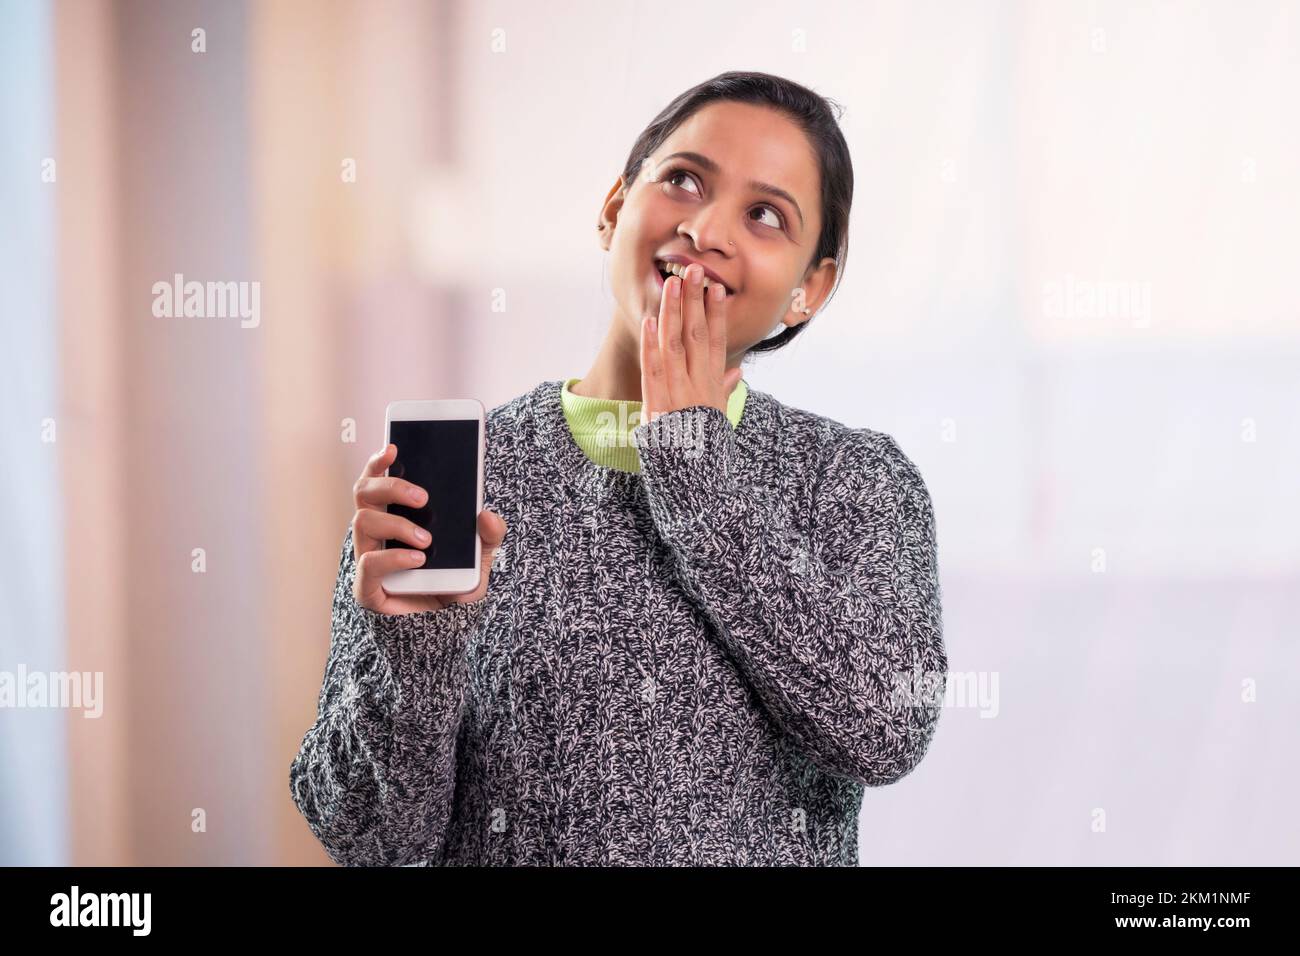 Portrait of young women showing blank screen of mobile phone and covering her mouth Stock Photo